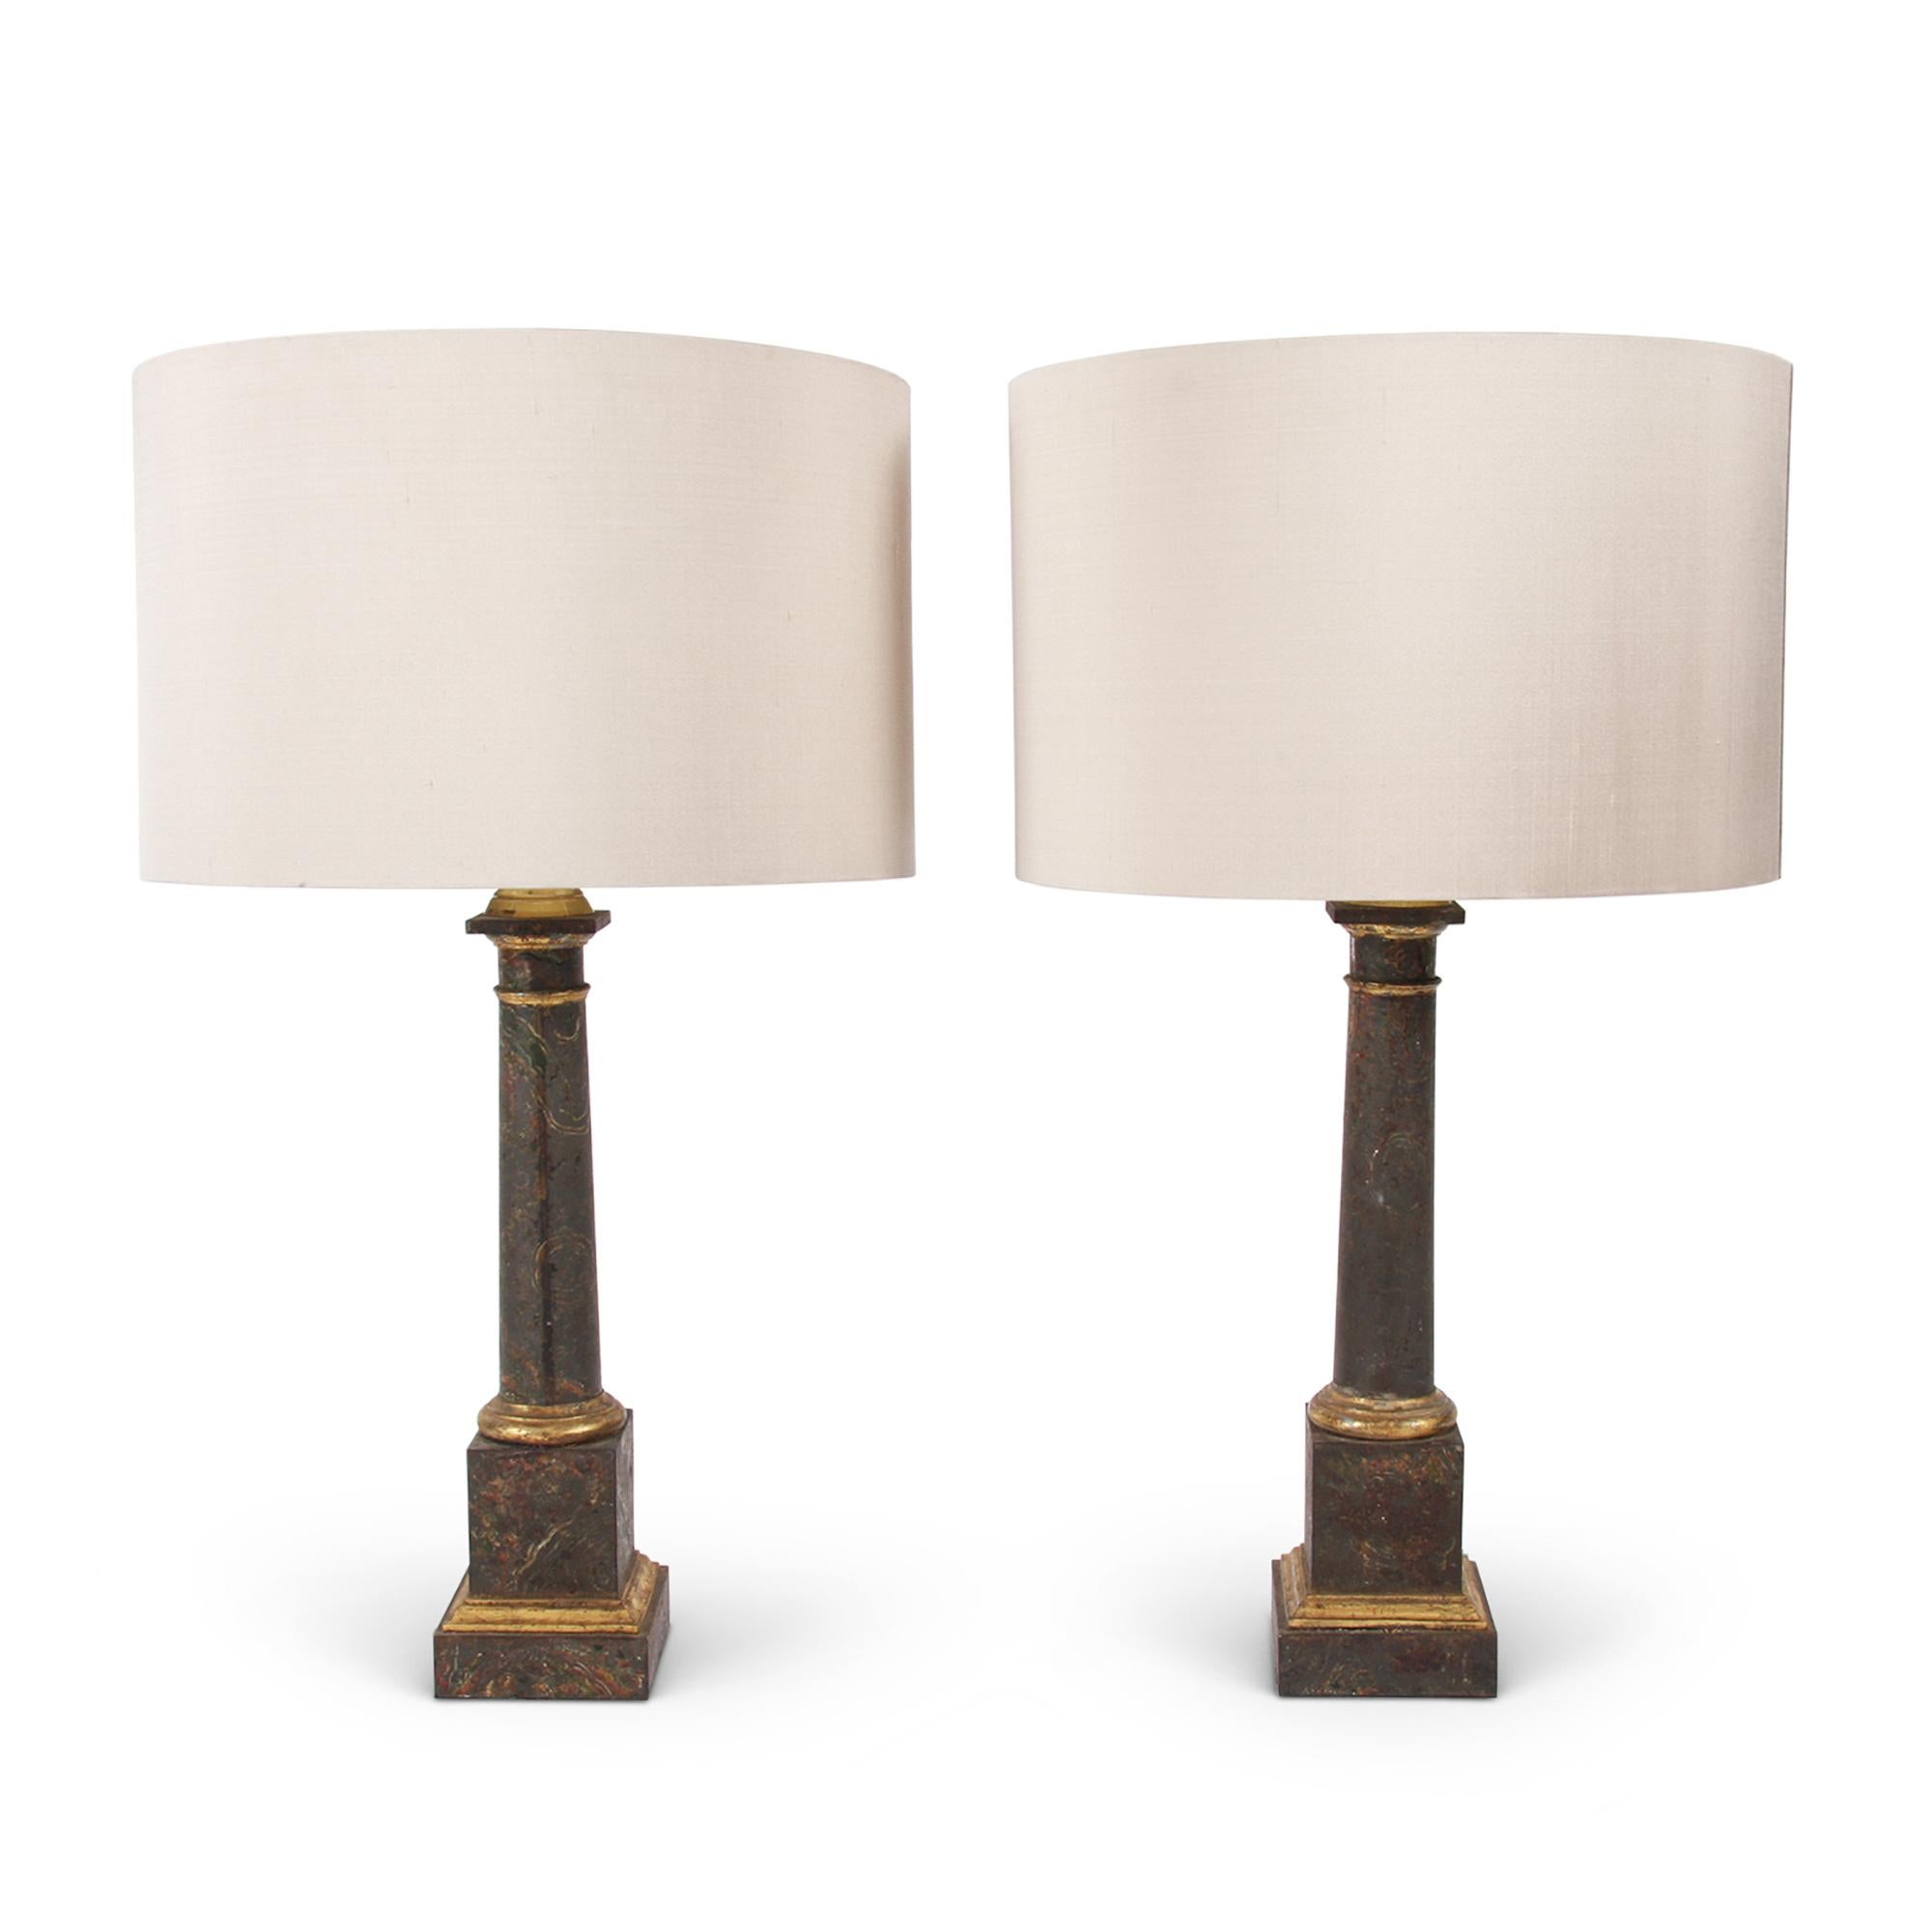 Mid-20th Century Pair of French Midcentury Faux Marble Table Lamps For Sale